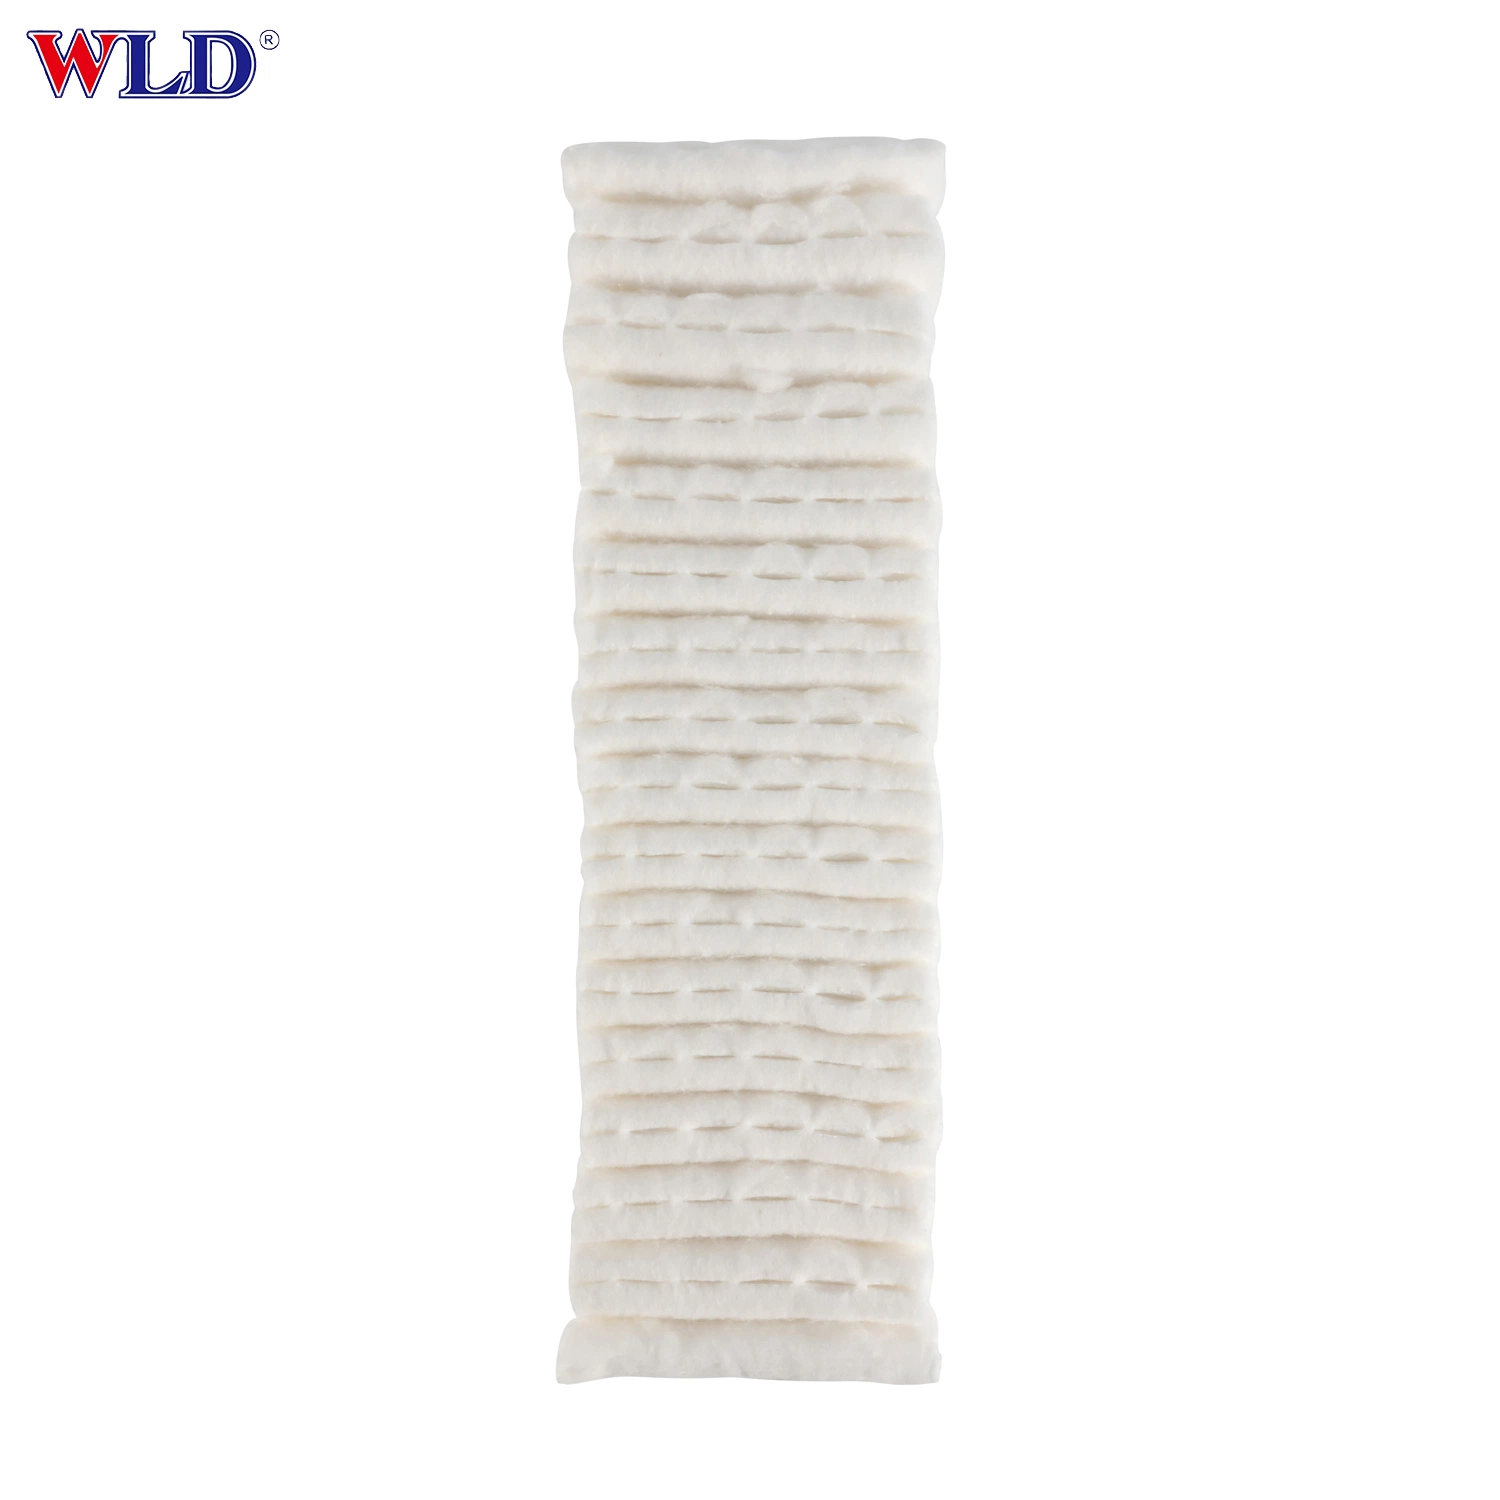 Disposable Medical Supply Products Zigzag Cotton